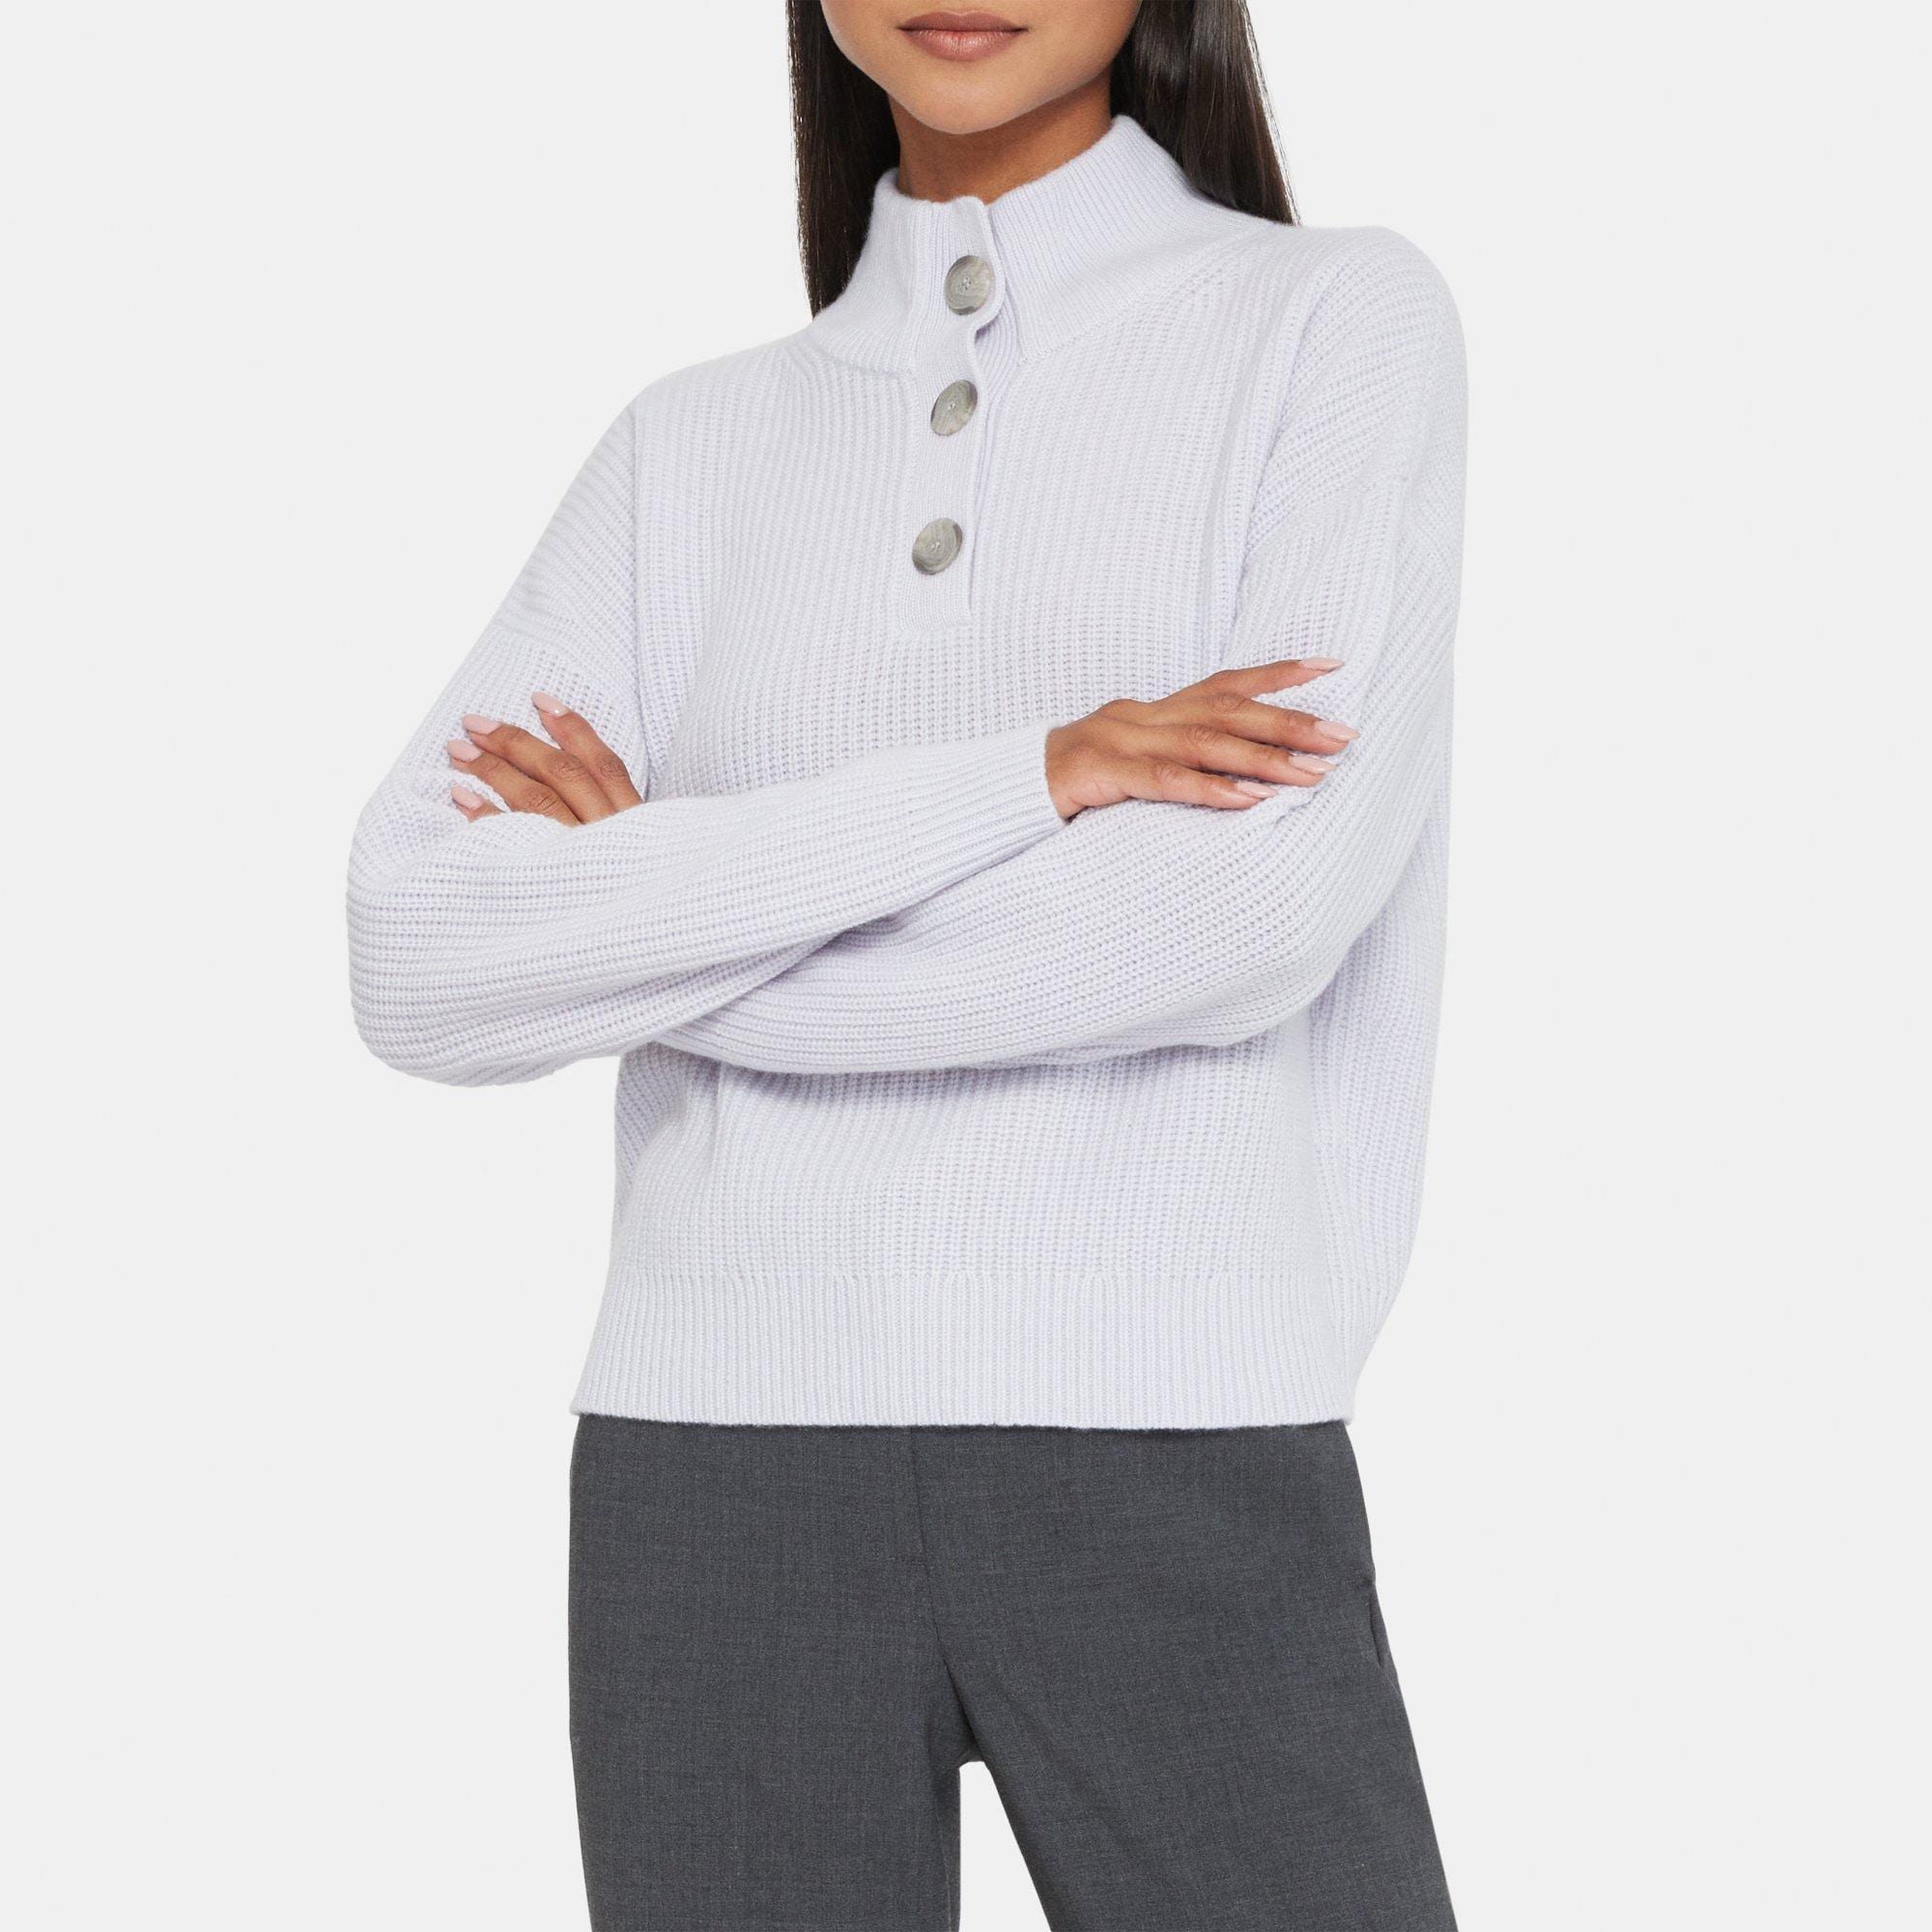 Theory Half-Button Sweater in Wool-Cashmere